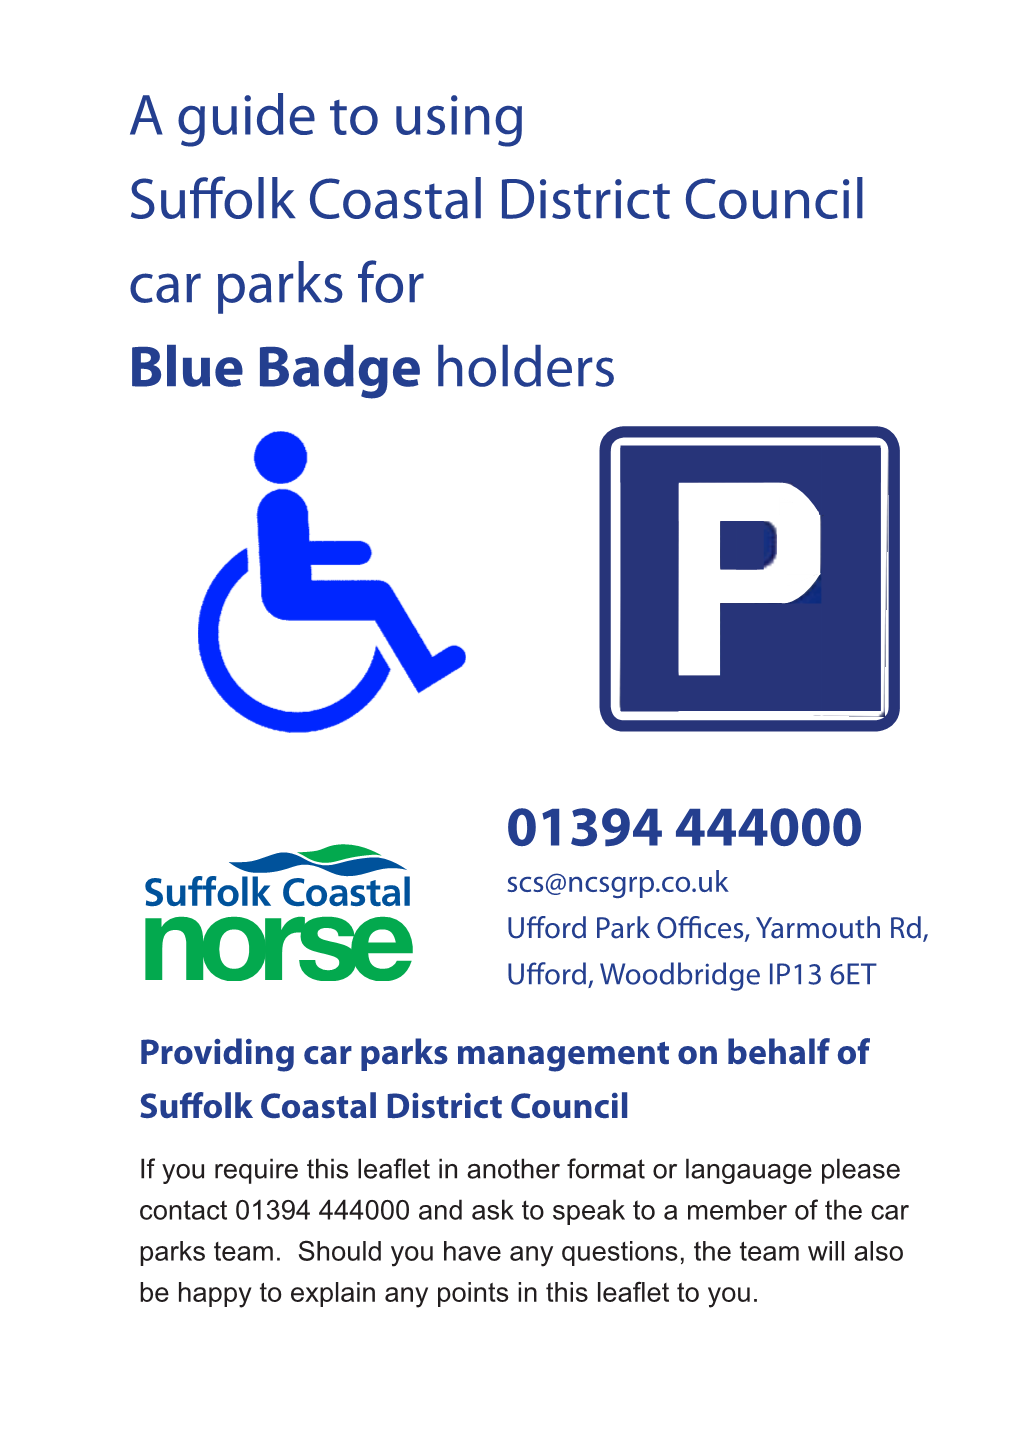 A Guide to Using Suffolk Coastal District Council Car Parks for Blue Badge Holders